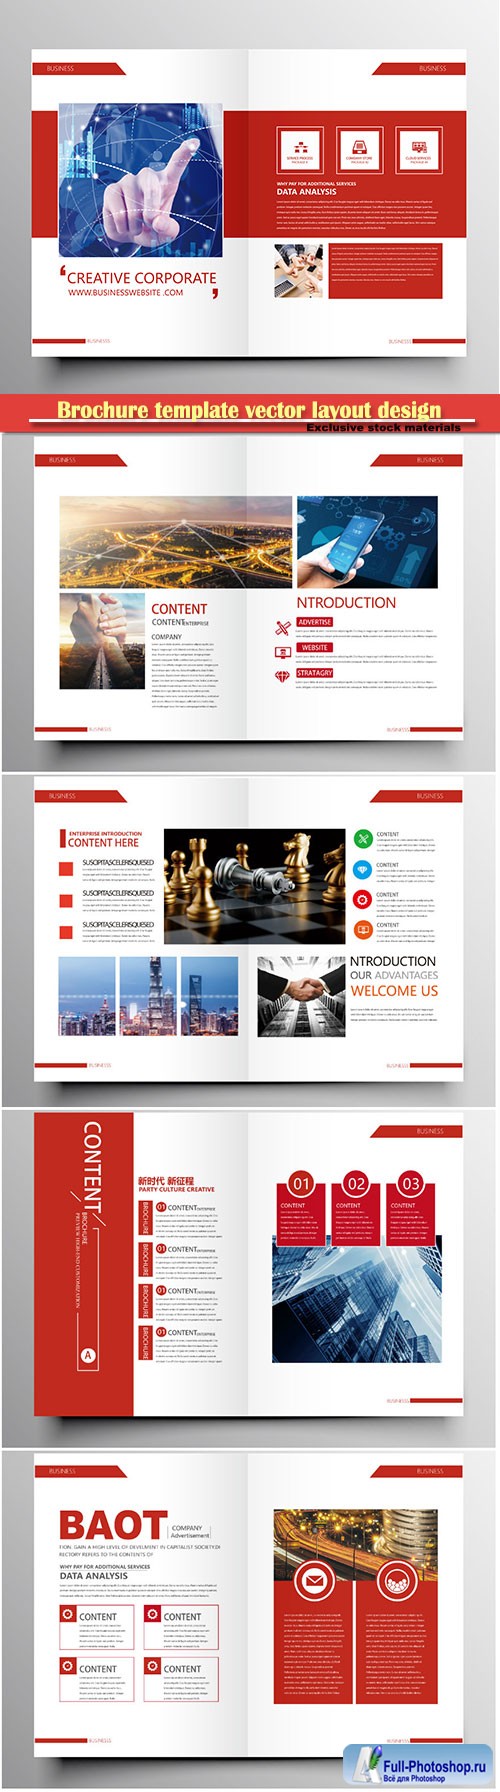 Brochure template vector layout design, corporate business annual report, magazine, flyer mockup # 179